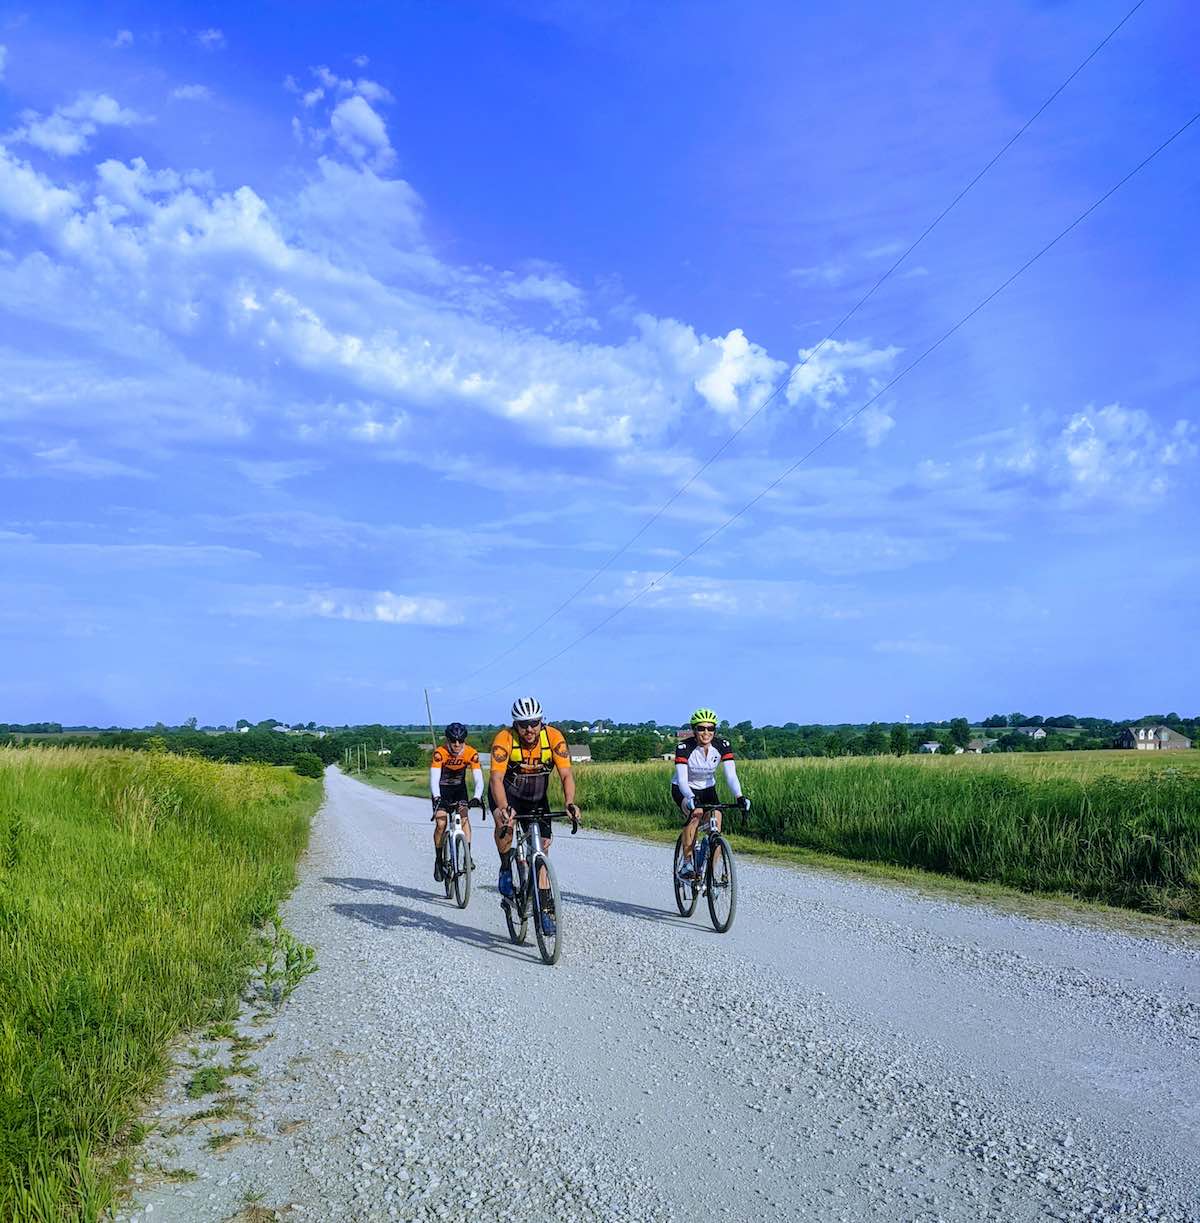 bikerumor pic of the day johnson county kansas three cyclists riding on a gravel road with green fields on either side and wide expanse of blue sky.